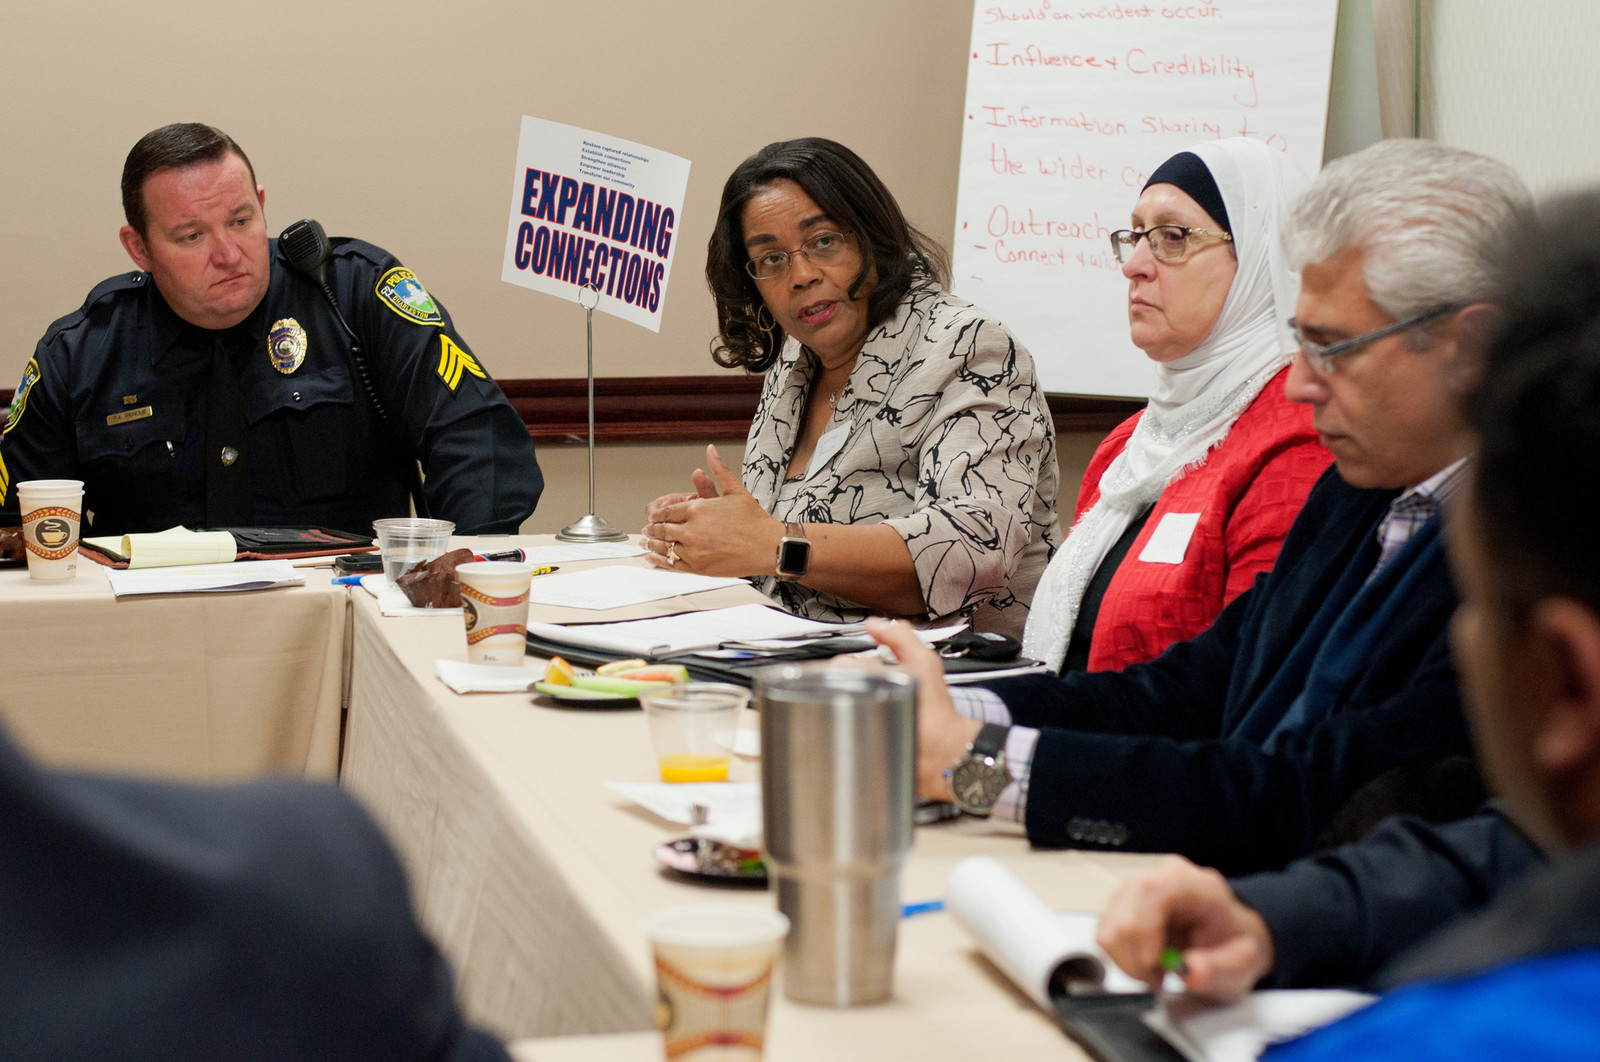 WV community members, police work together to address racism